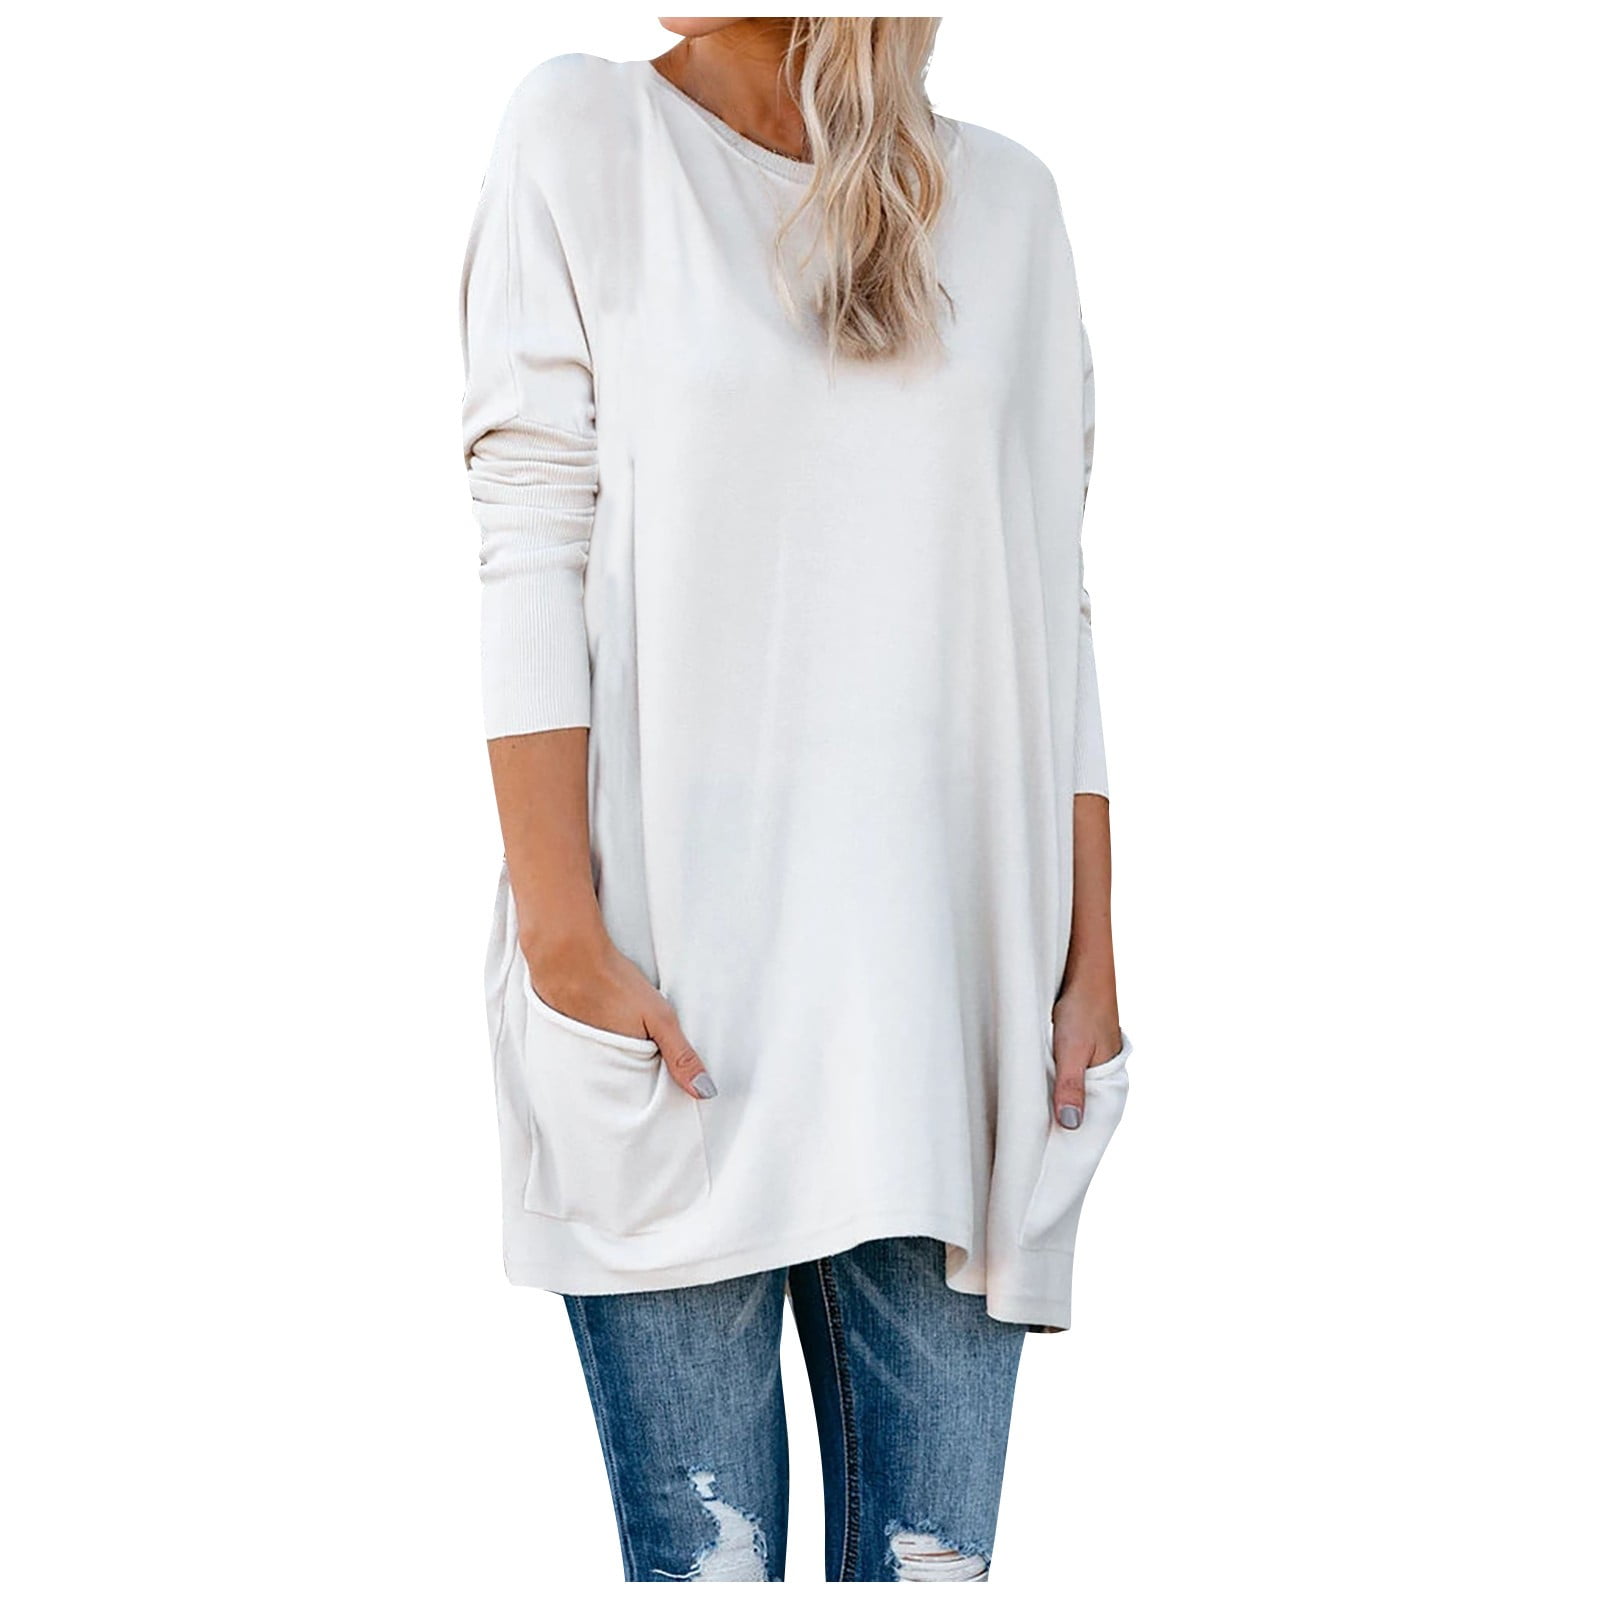 Tunic Tops to Wear with Leggings for Women Casual Crewneck Long Sleeve ...